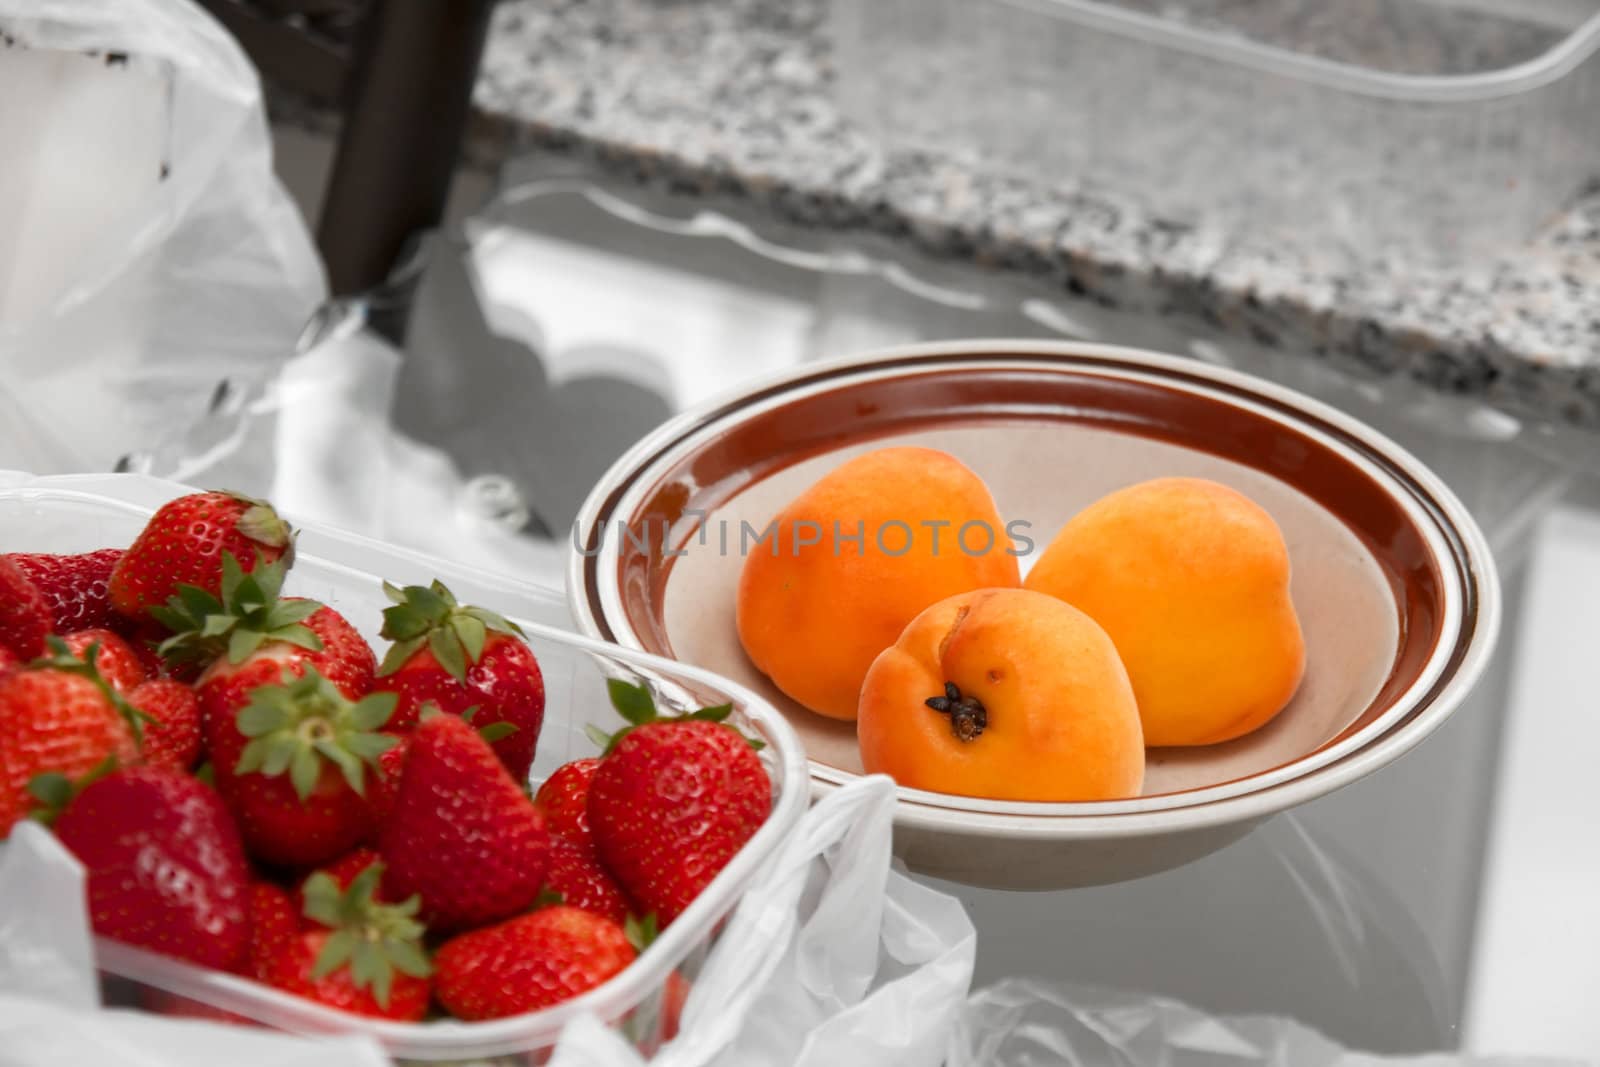 Peaches and strawberries on a table